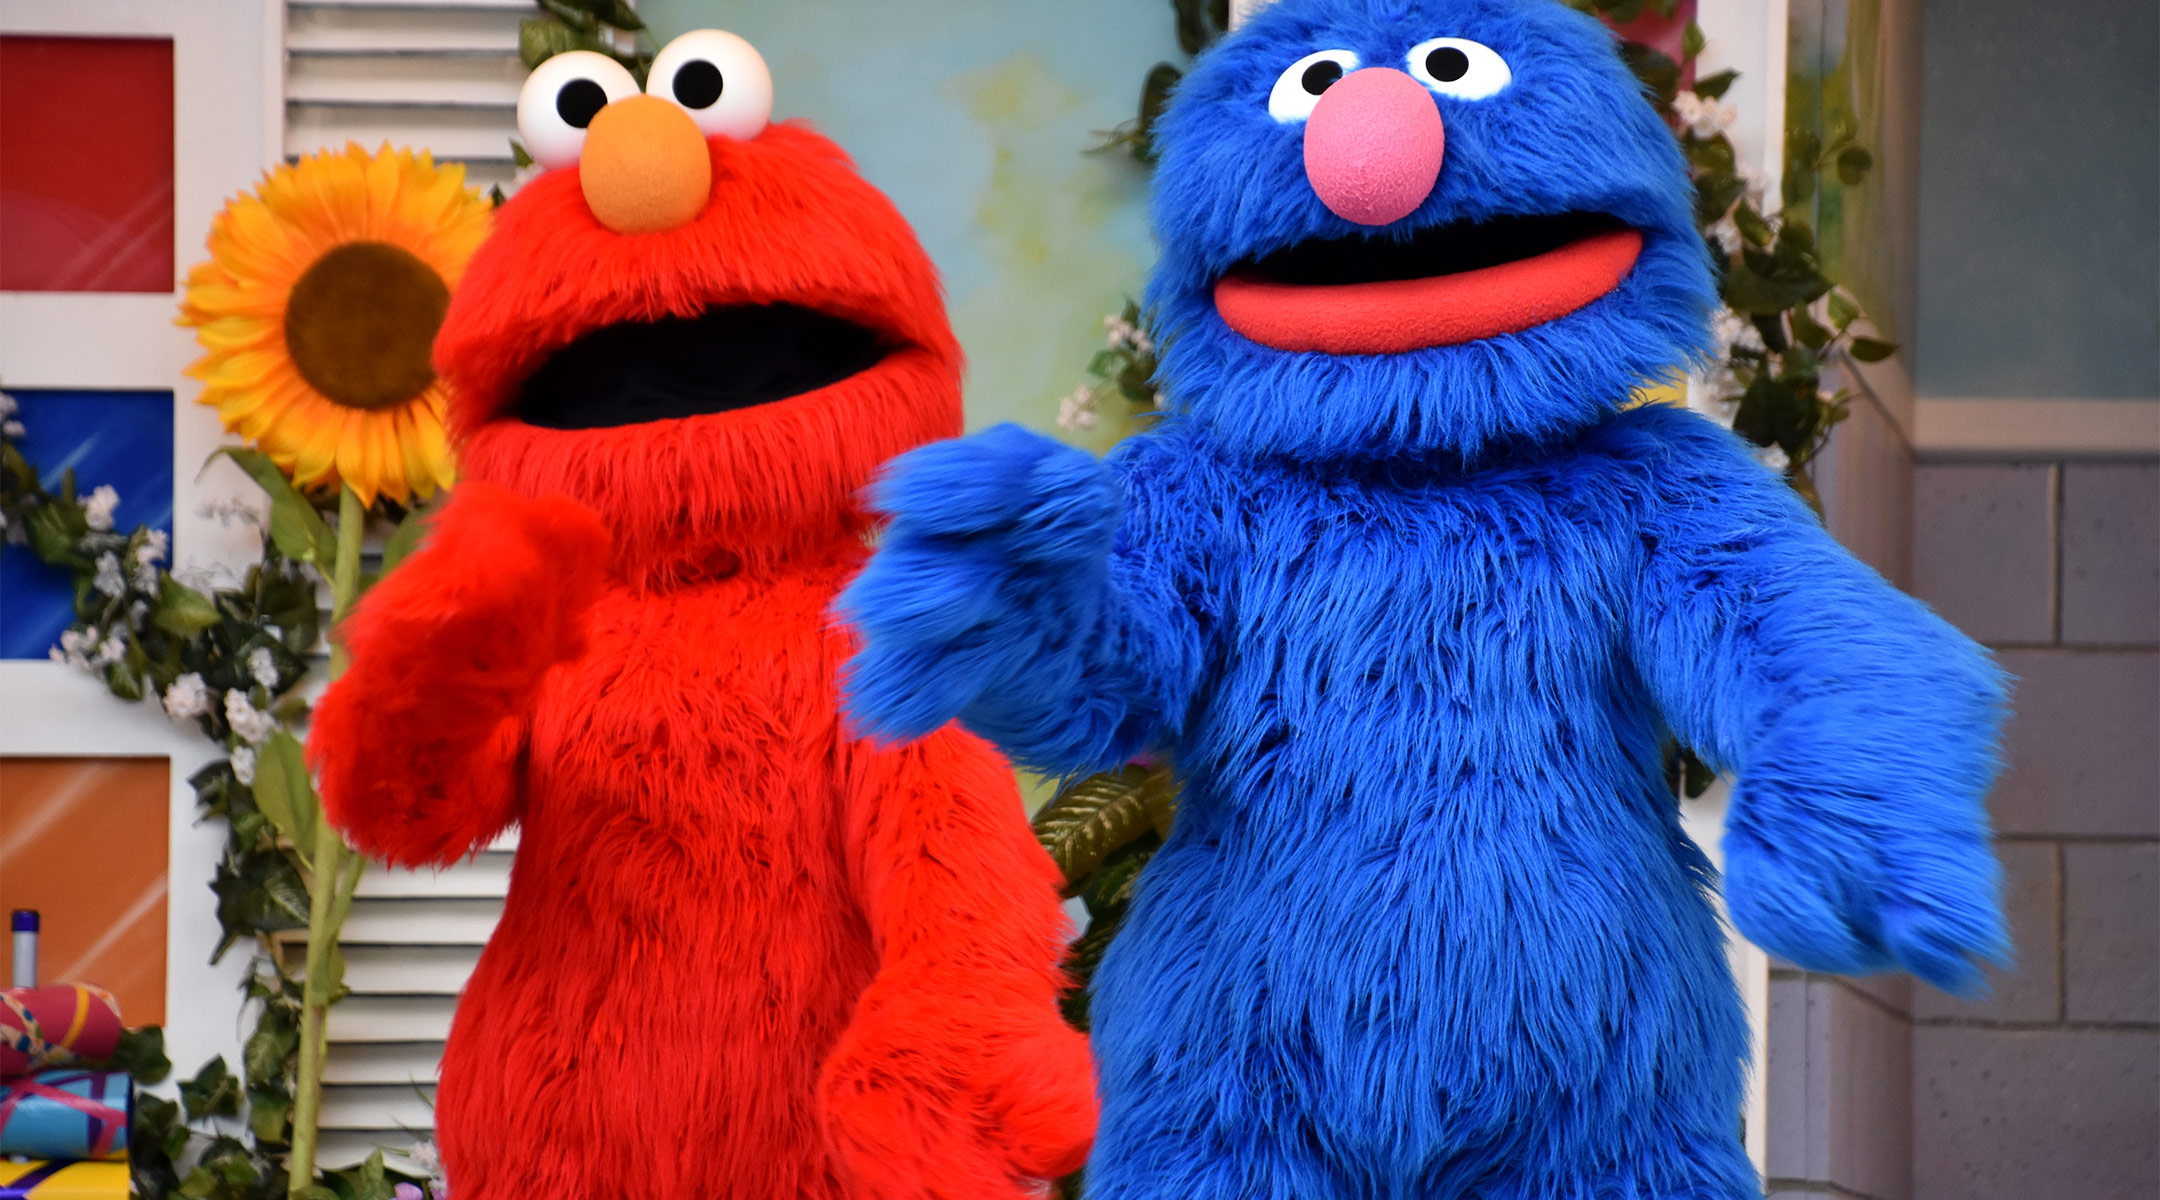 elmo and cookie monster from sesame street